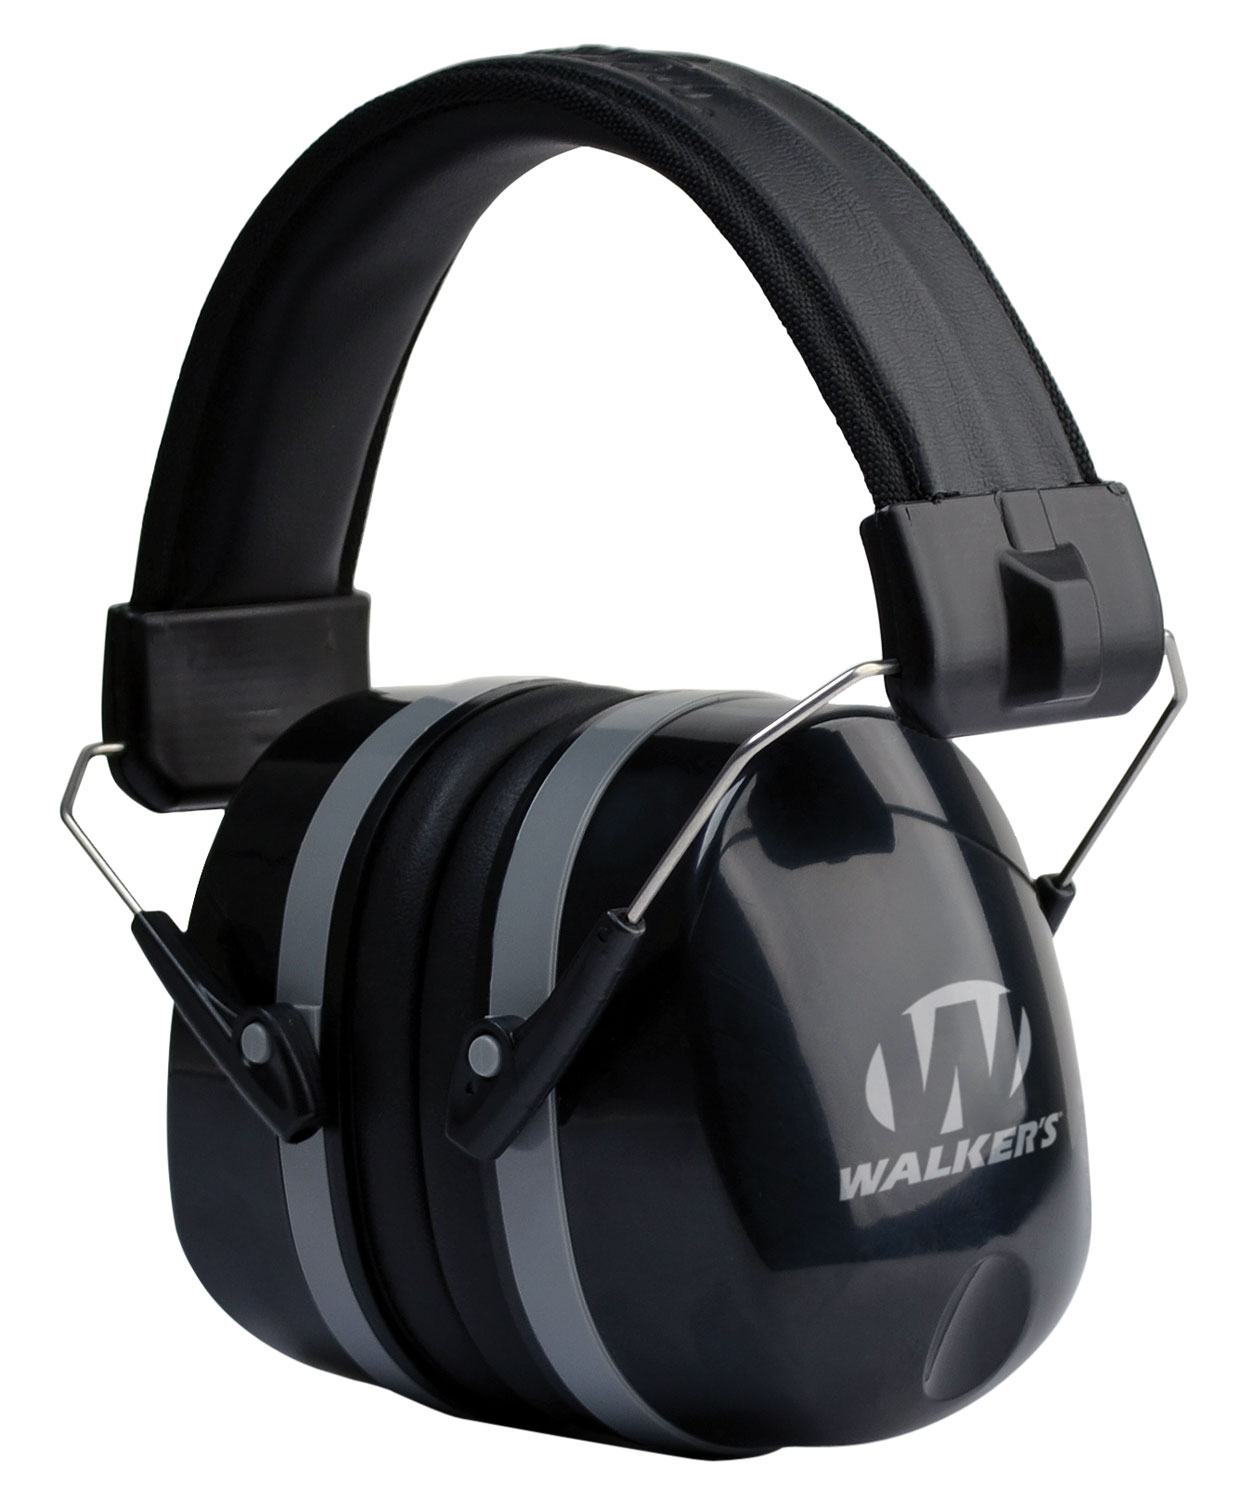 Walkers GWPEXFM5 Premium Passive Muff Polymer 32 dB Folding Over the Head Black Ear Cups with Black Headband Adult